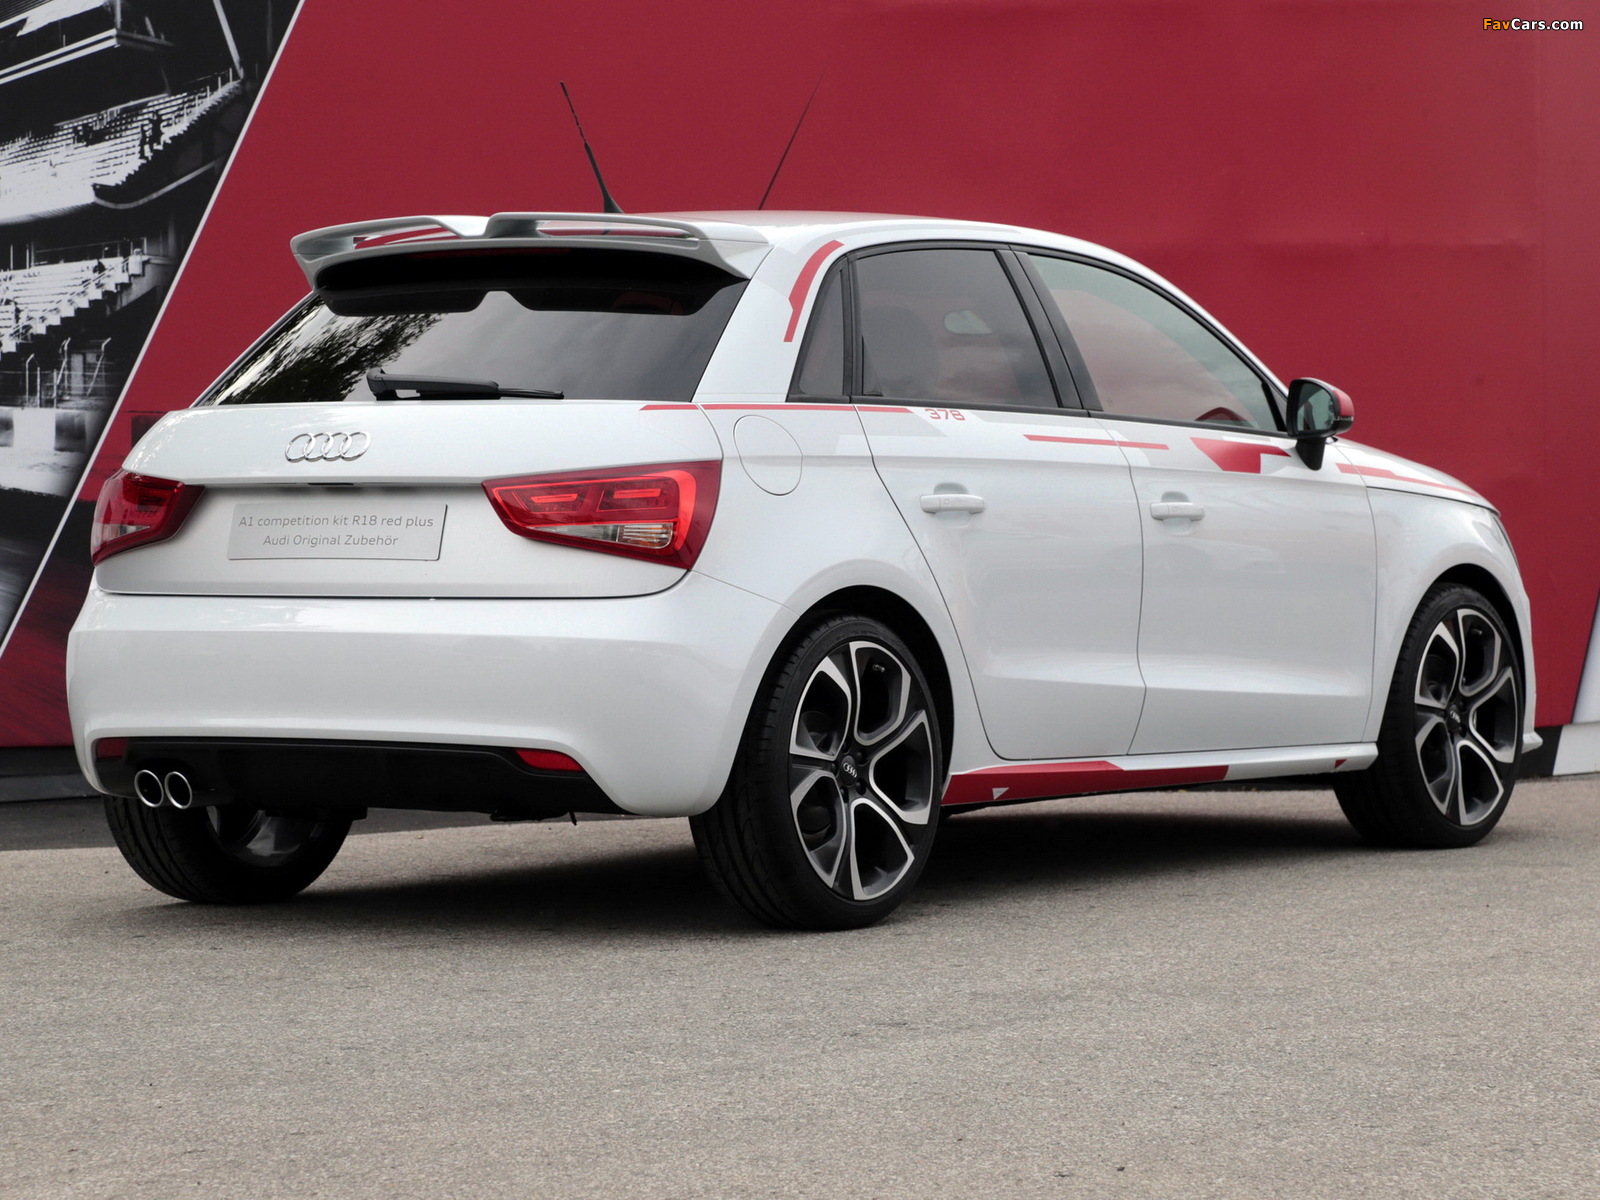 Audi A1 Sportback Competition Kit R18 Red Plus (8X) 2013 images (1600 x 1200)